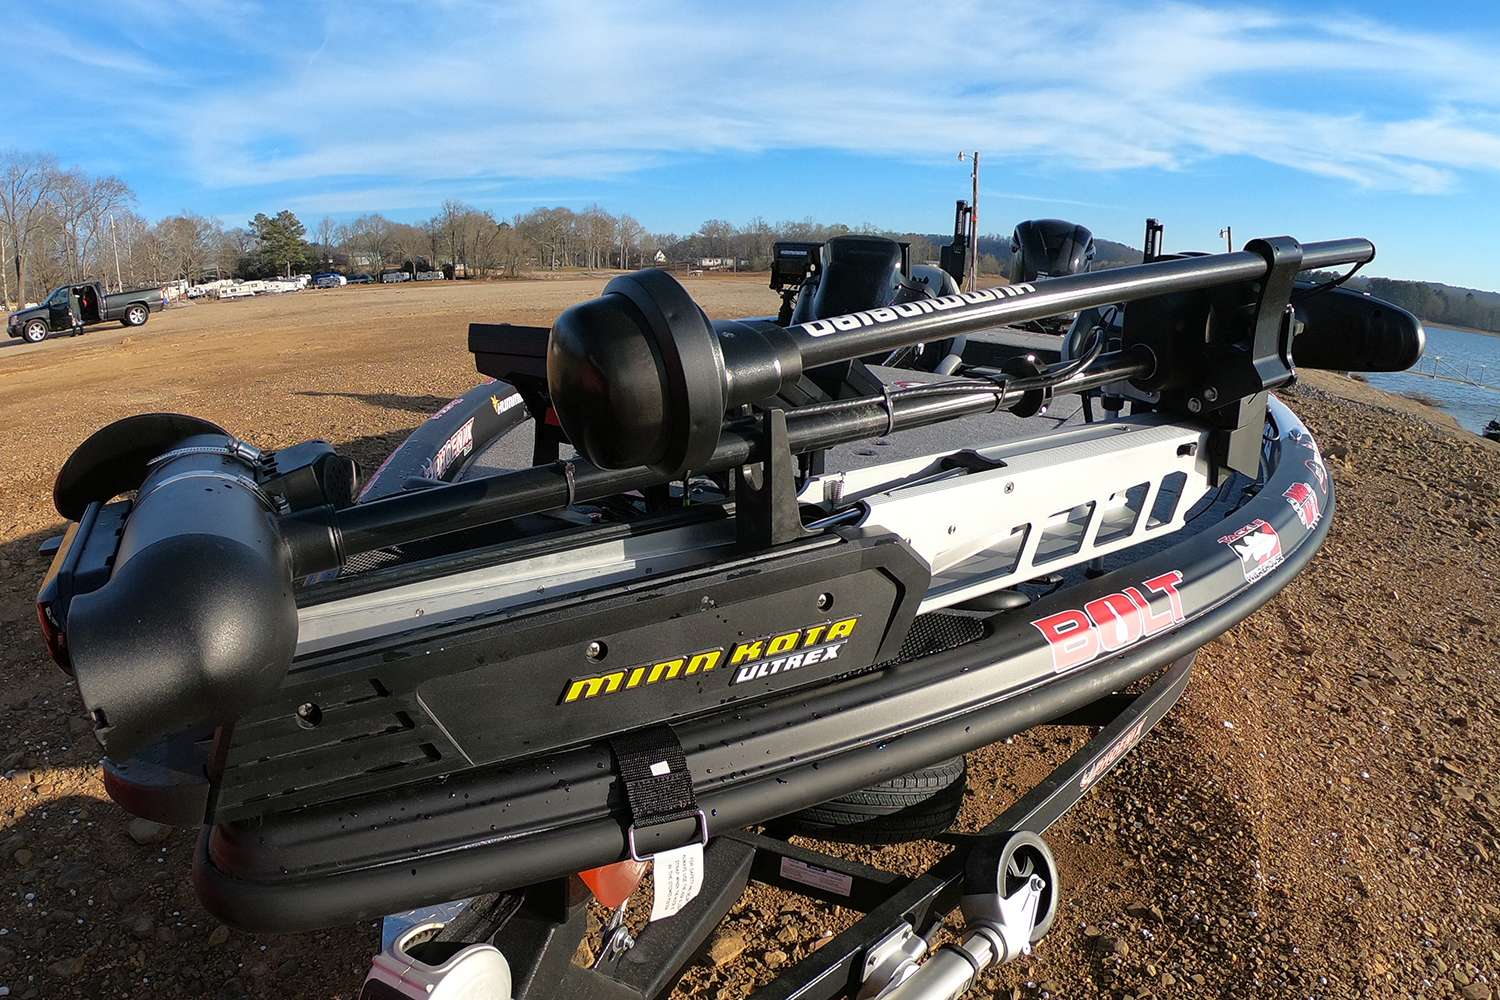 Starting at the bow, the front-end command center pivots on a Minn Kota Ultrex partnered with a Humminbird 360 transducer. 